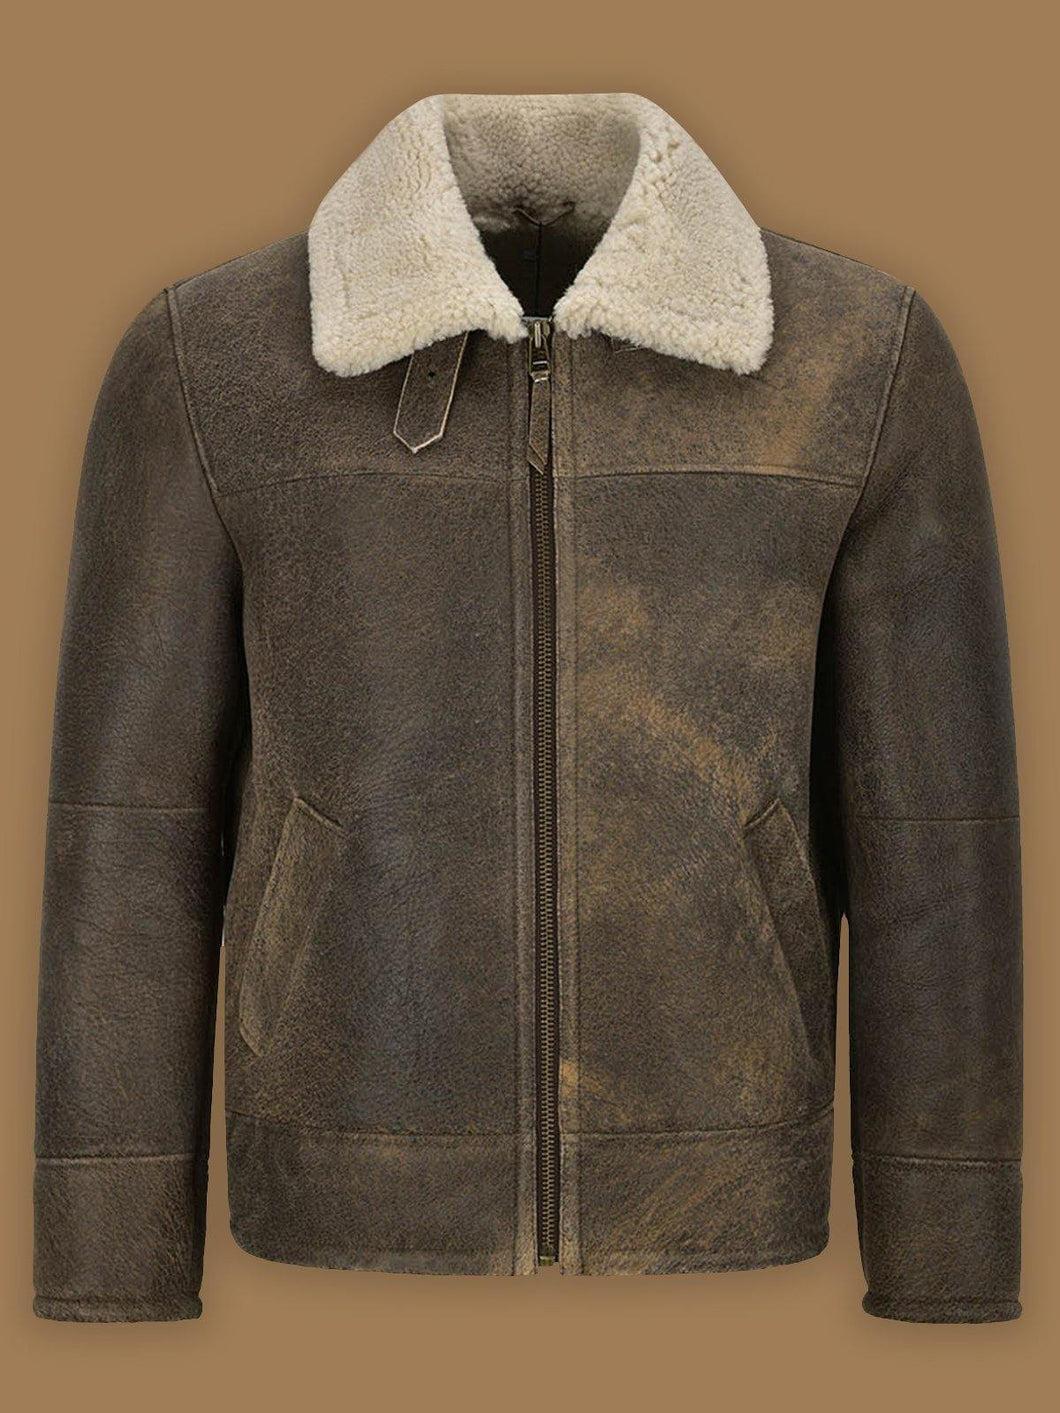 Men Old Fashion Brown Shearling Bomber Leather Jacket - Shearling leather